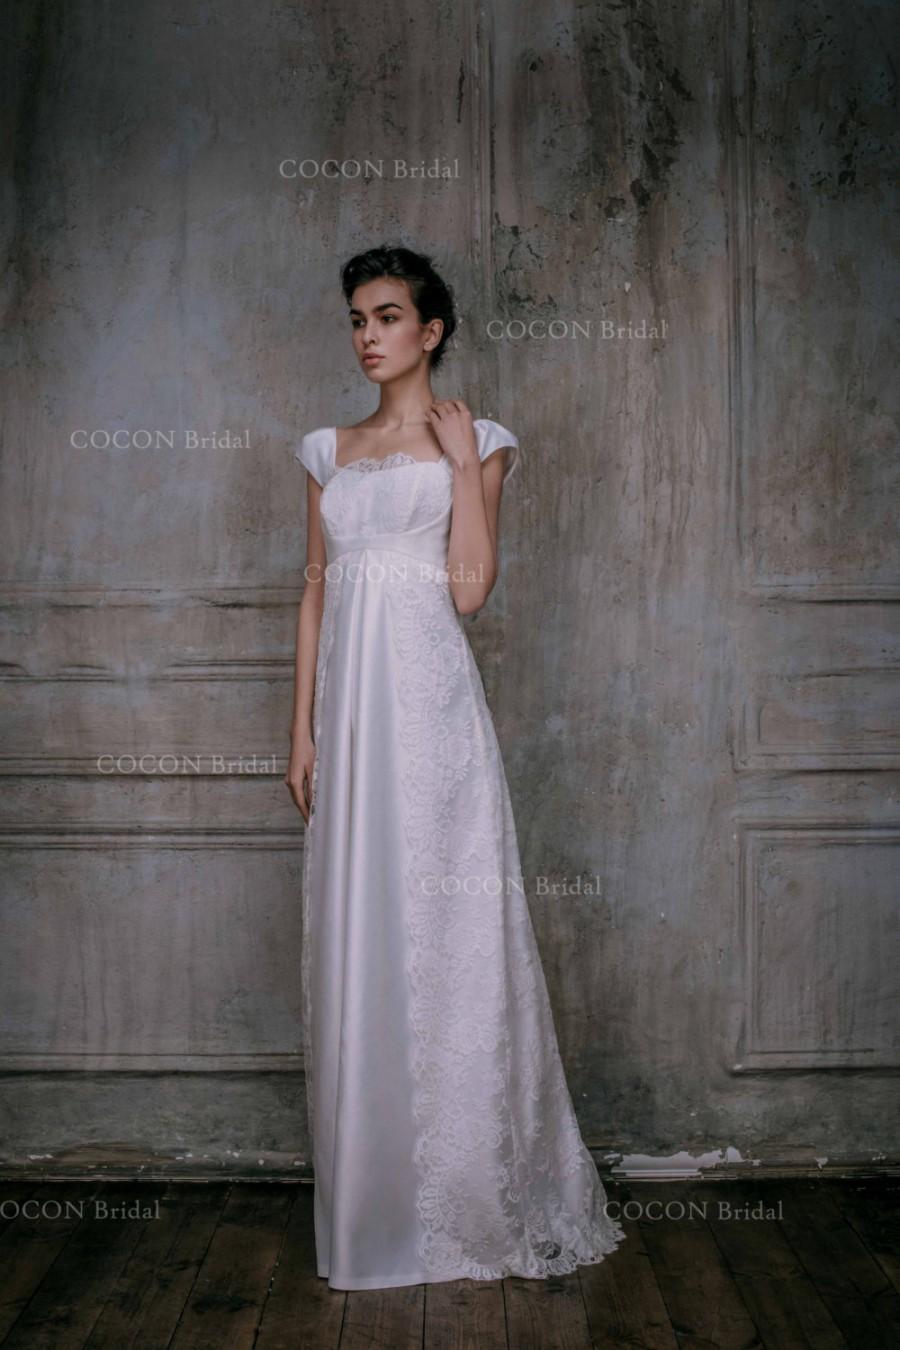 Mariage - Beautiful Wedding dress Elegant and chic wedding gown Bohemian wedding Silk Satin gown Lace gown Haute Couture dress Grecian syle -Tenereza